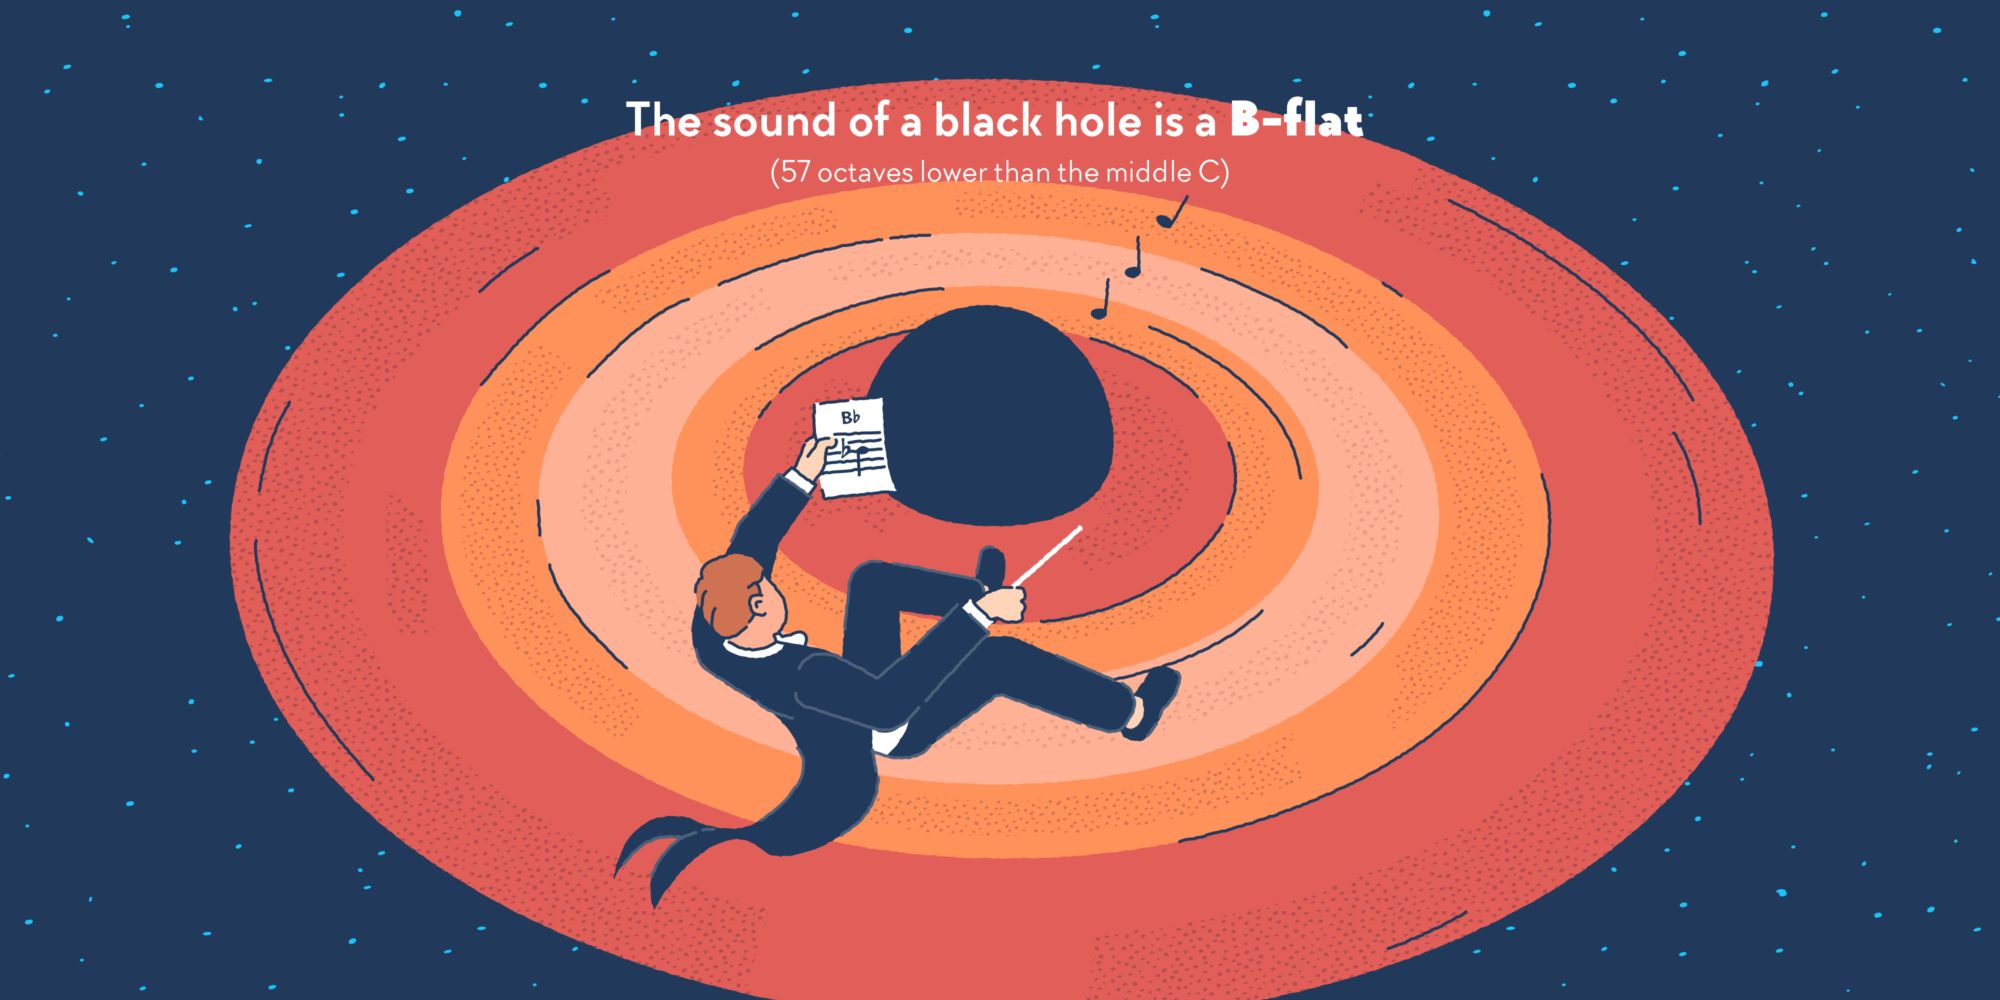 An orchestra conductor floating around a black hole that is producing music